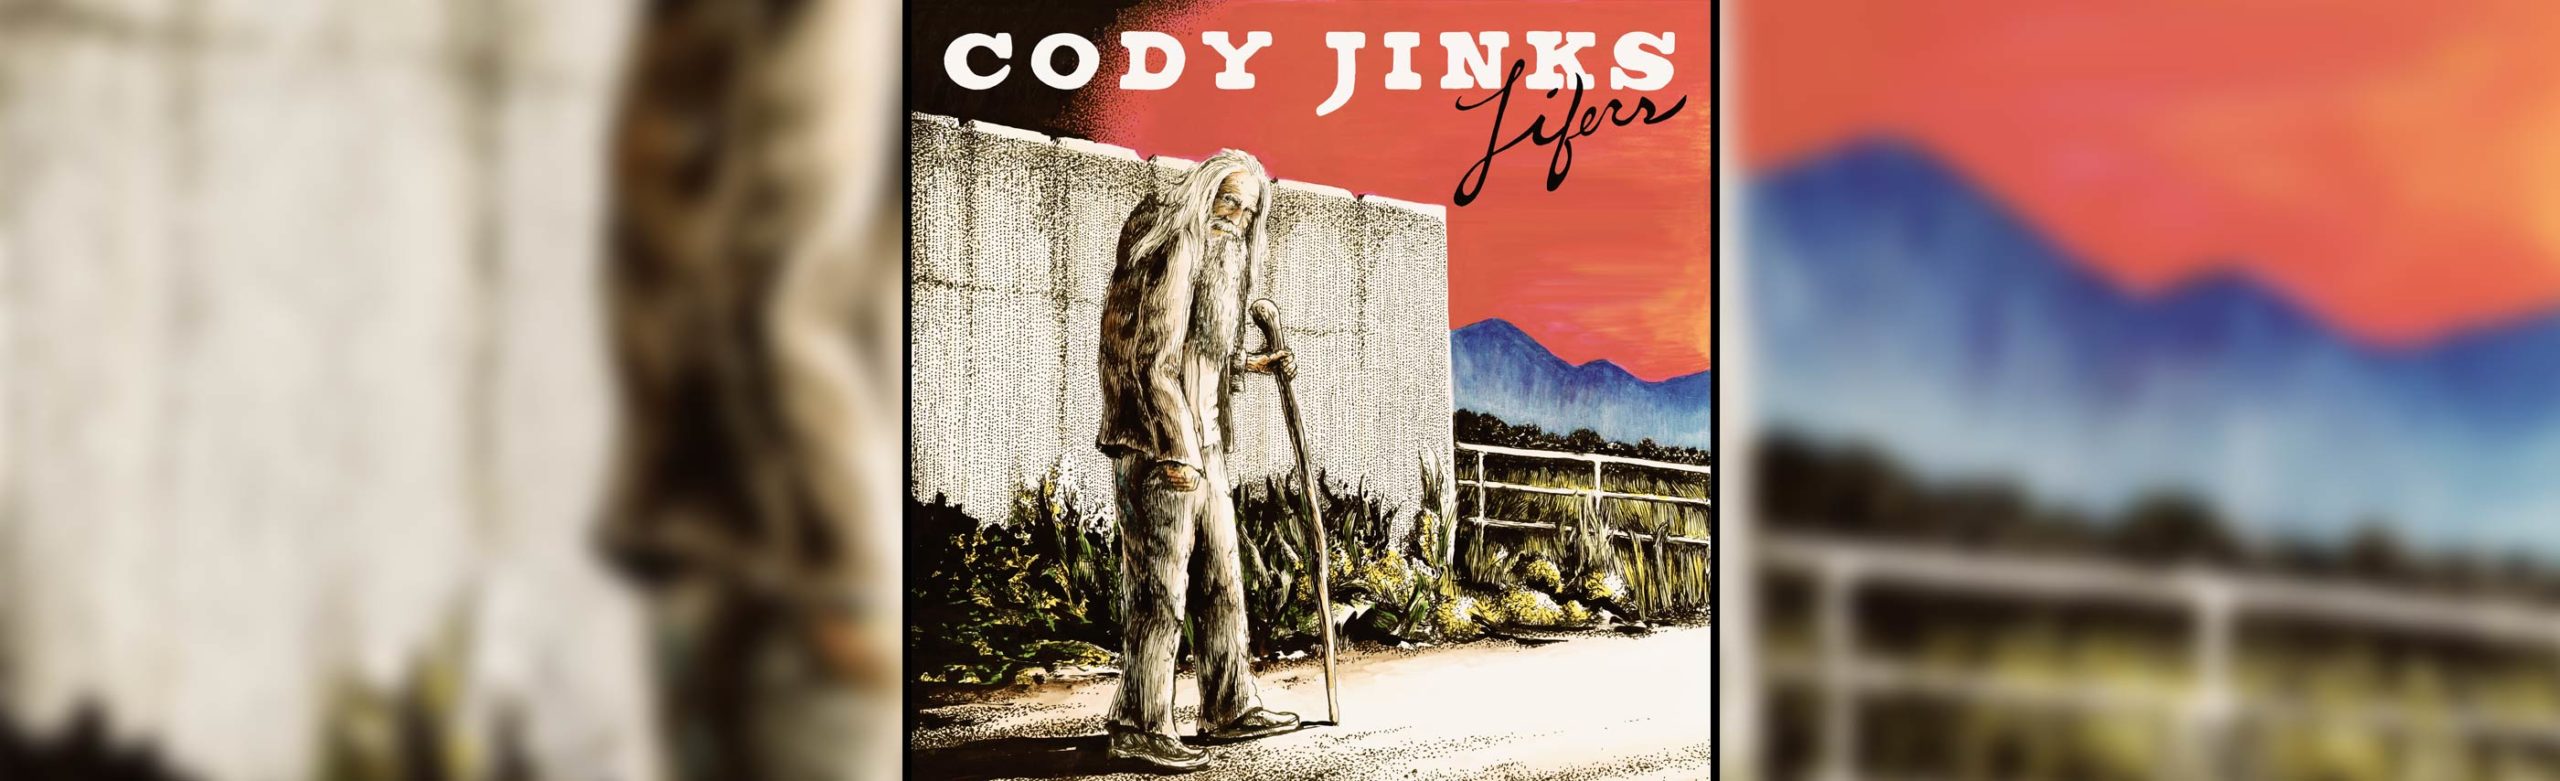 LISTEN: Cody Jinks Releases Highly Anticipated New Album Image